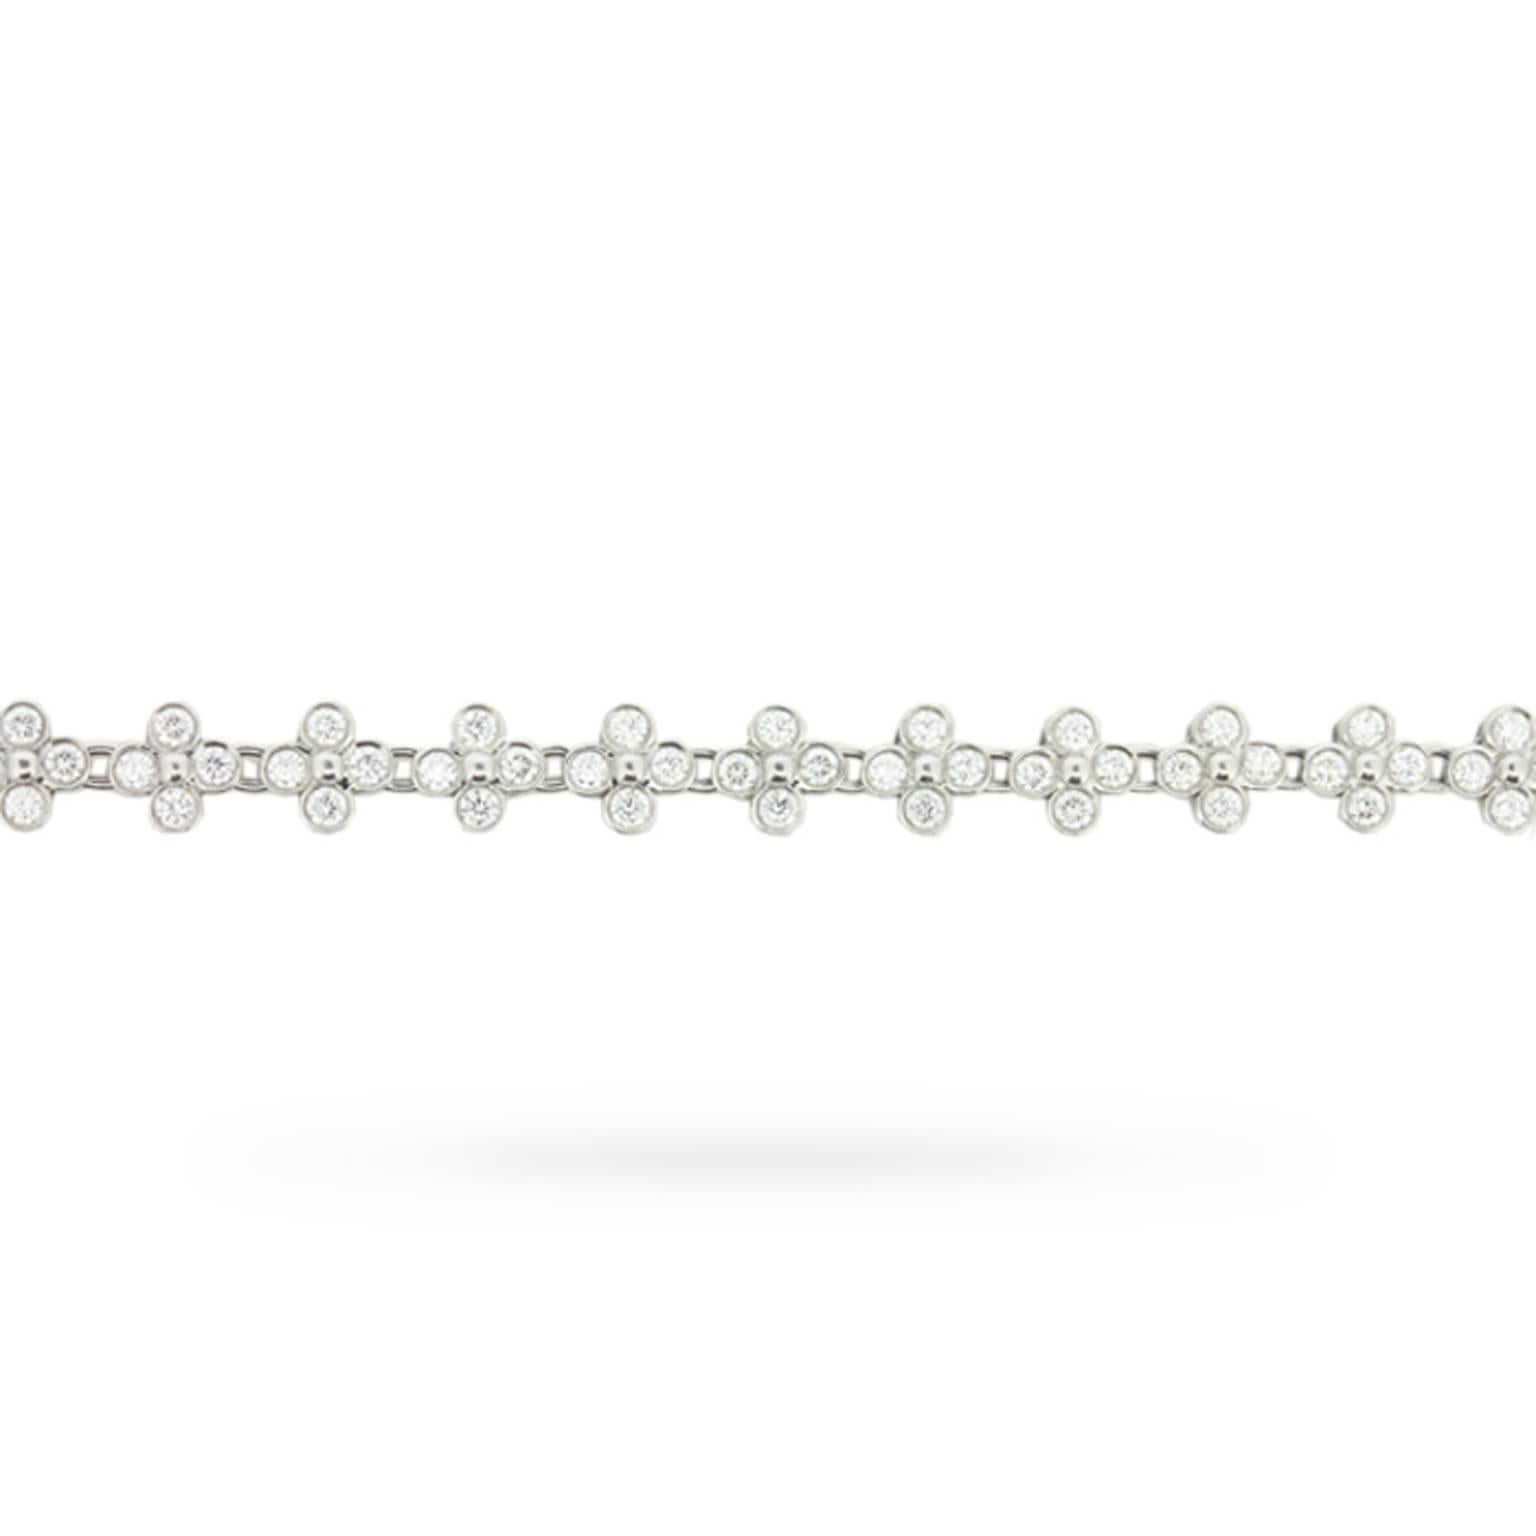 This enviable ‘Tiffany Lace’ diamond necklace is delicately constructed in platinum of individual diamond florets gracefully linked together with small rings. The necklace is hand-set with 5.30 carats of fine, fiery, round brilliant cut Tiffany &